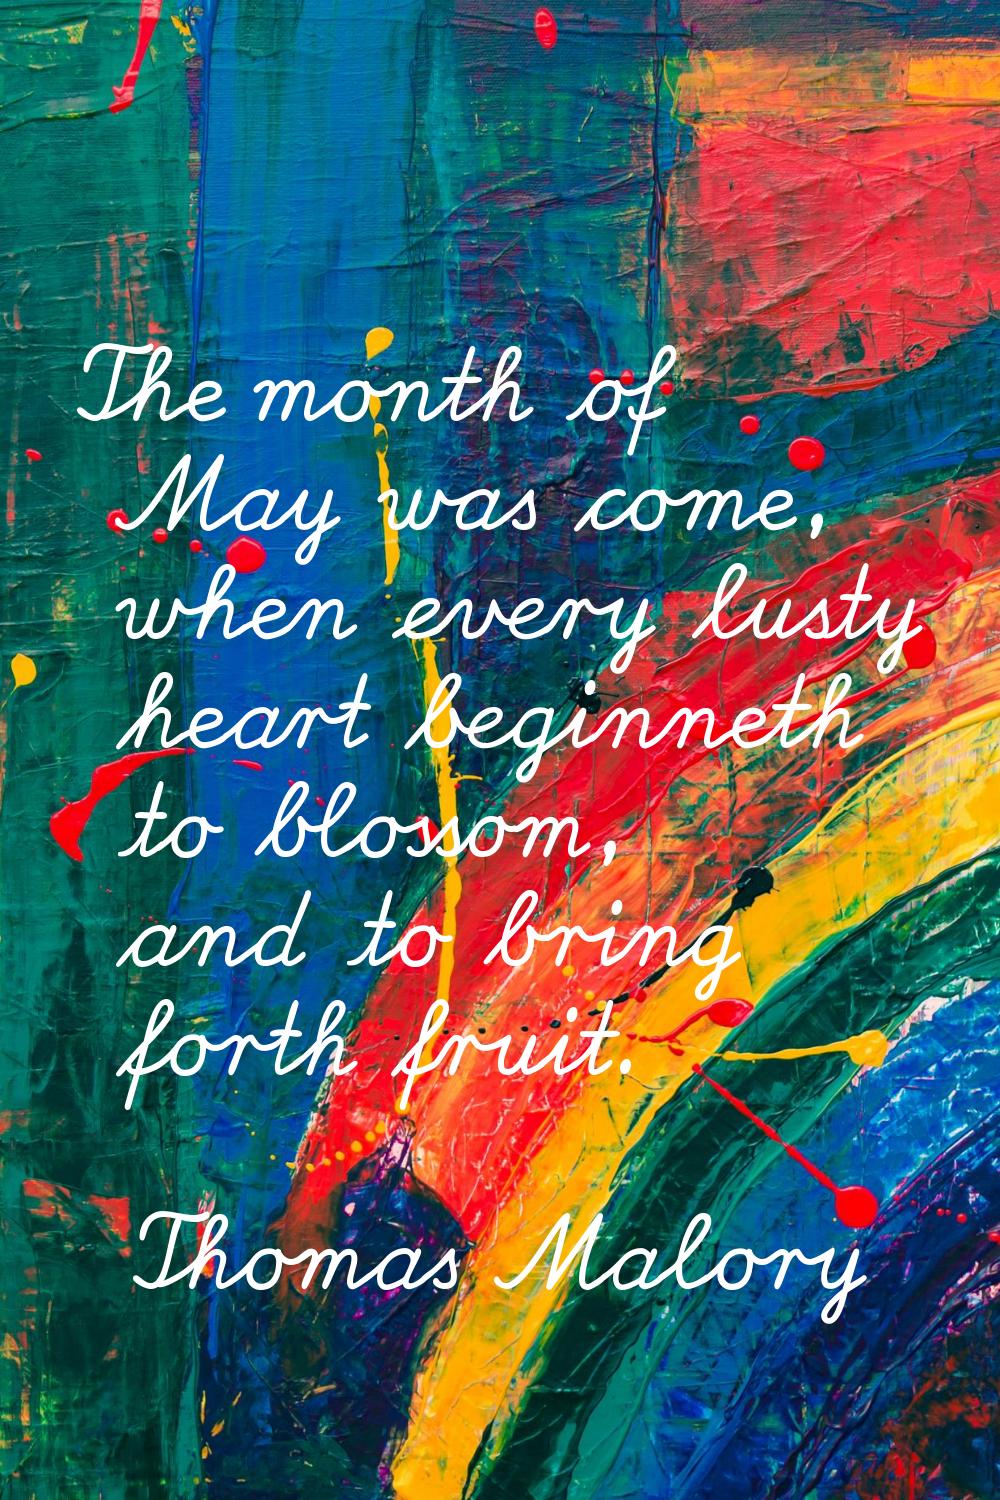 The month of May was come, when every lusty heart beginneth to blossom, and to bring forth fruit.